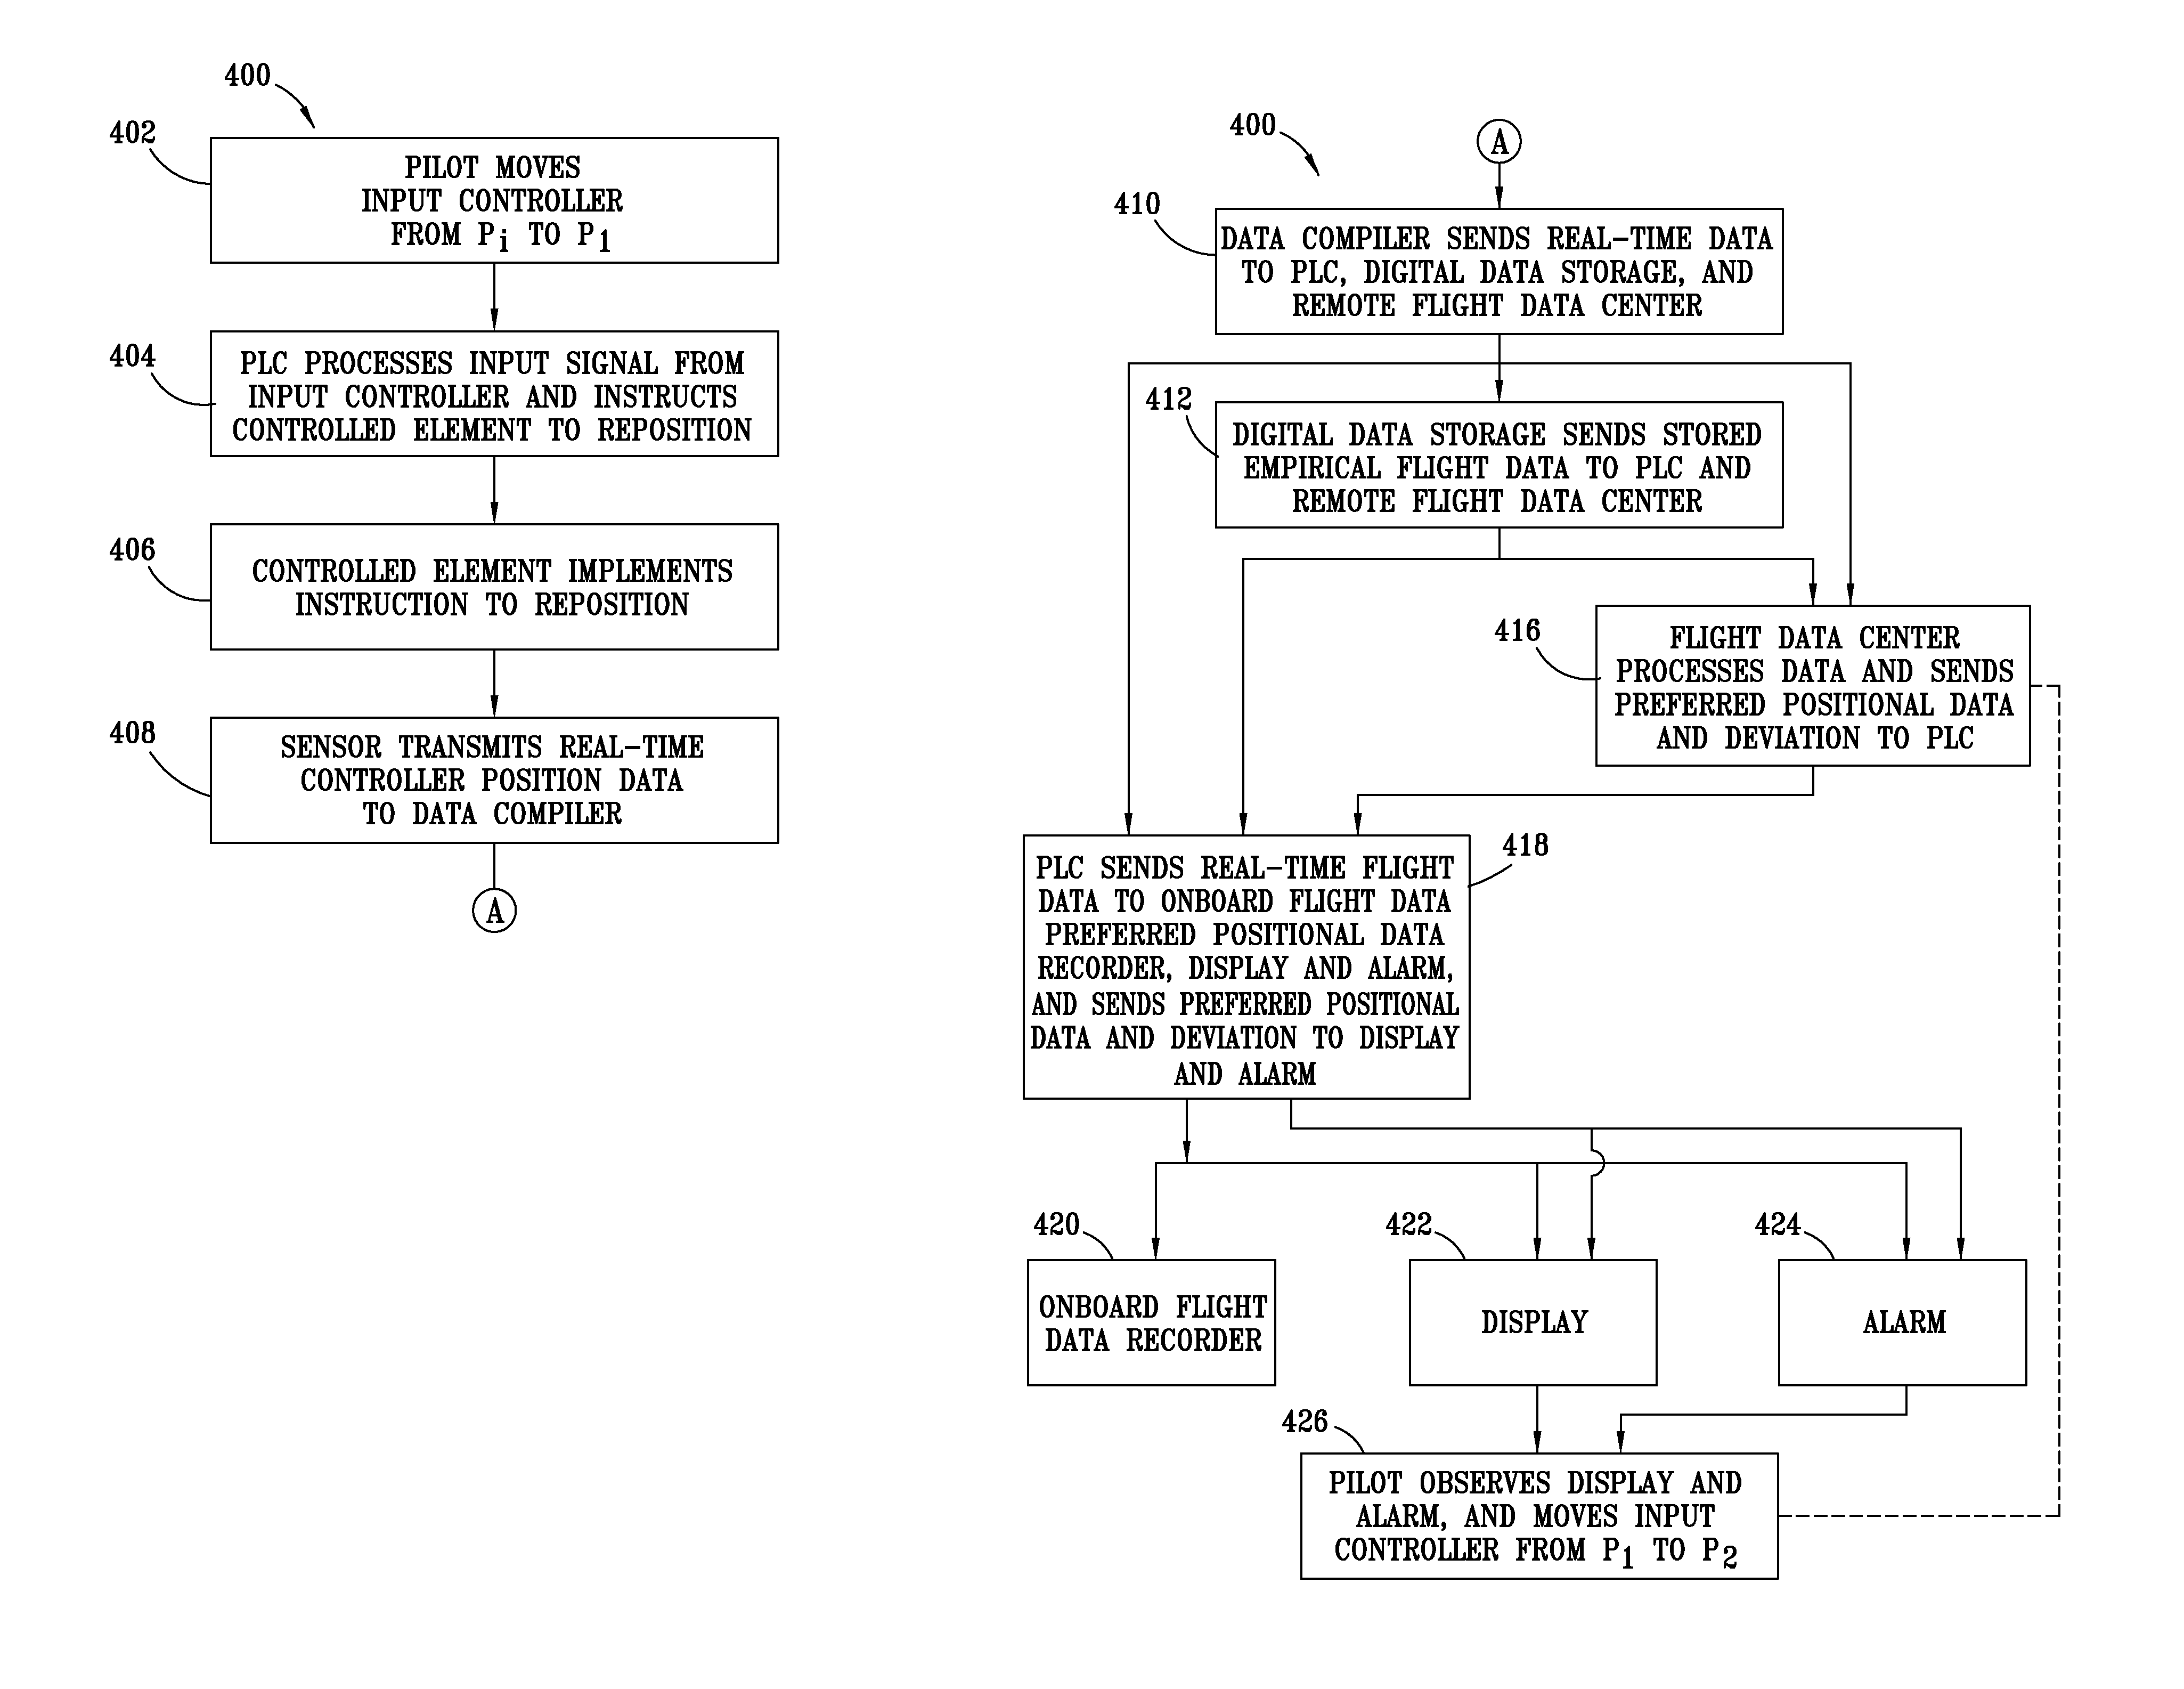 Operator Training and Maneuver Refinement System and Method for Aircraft, Vehicles and Equipment